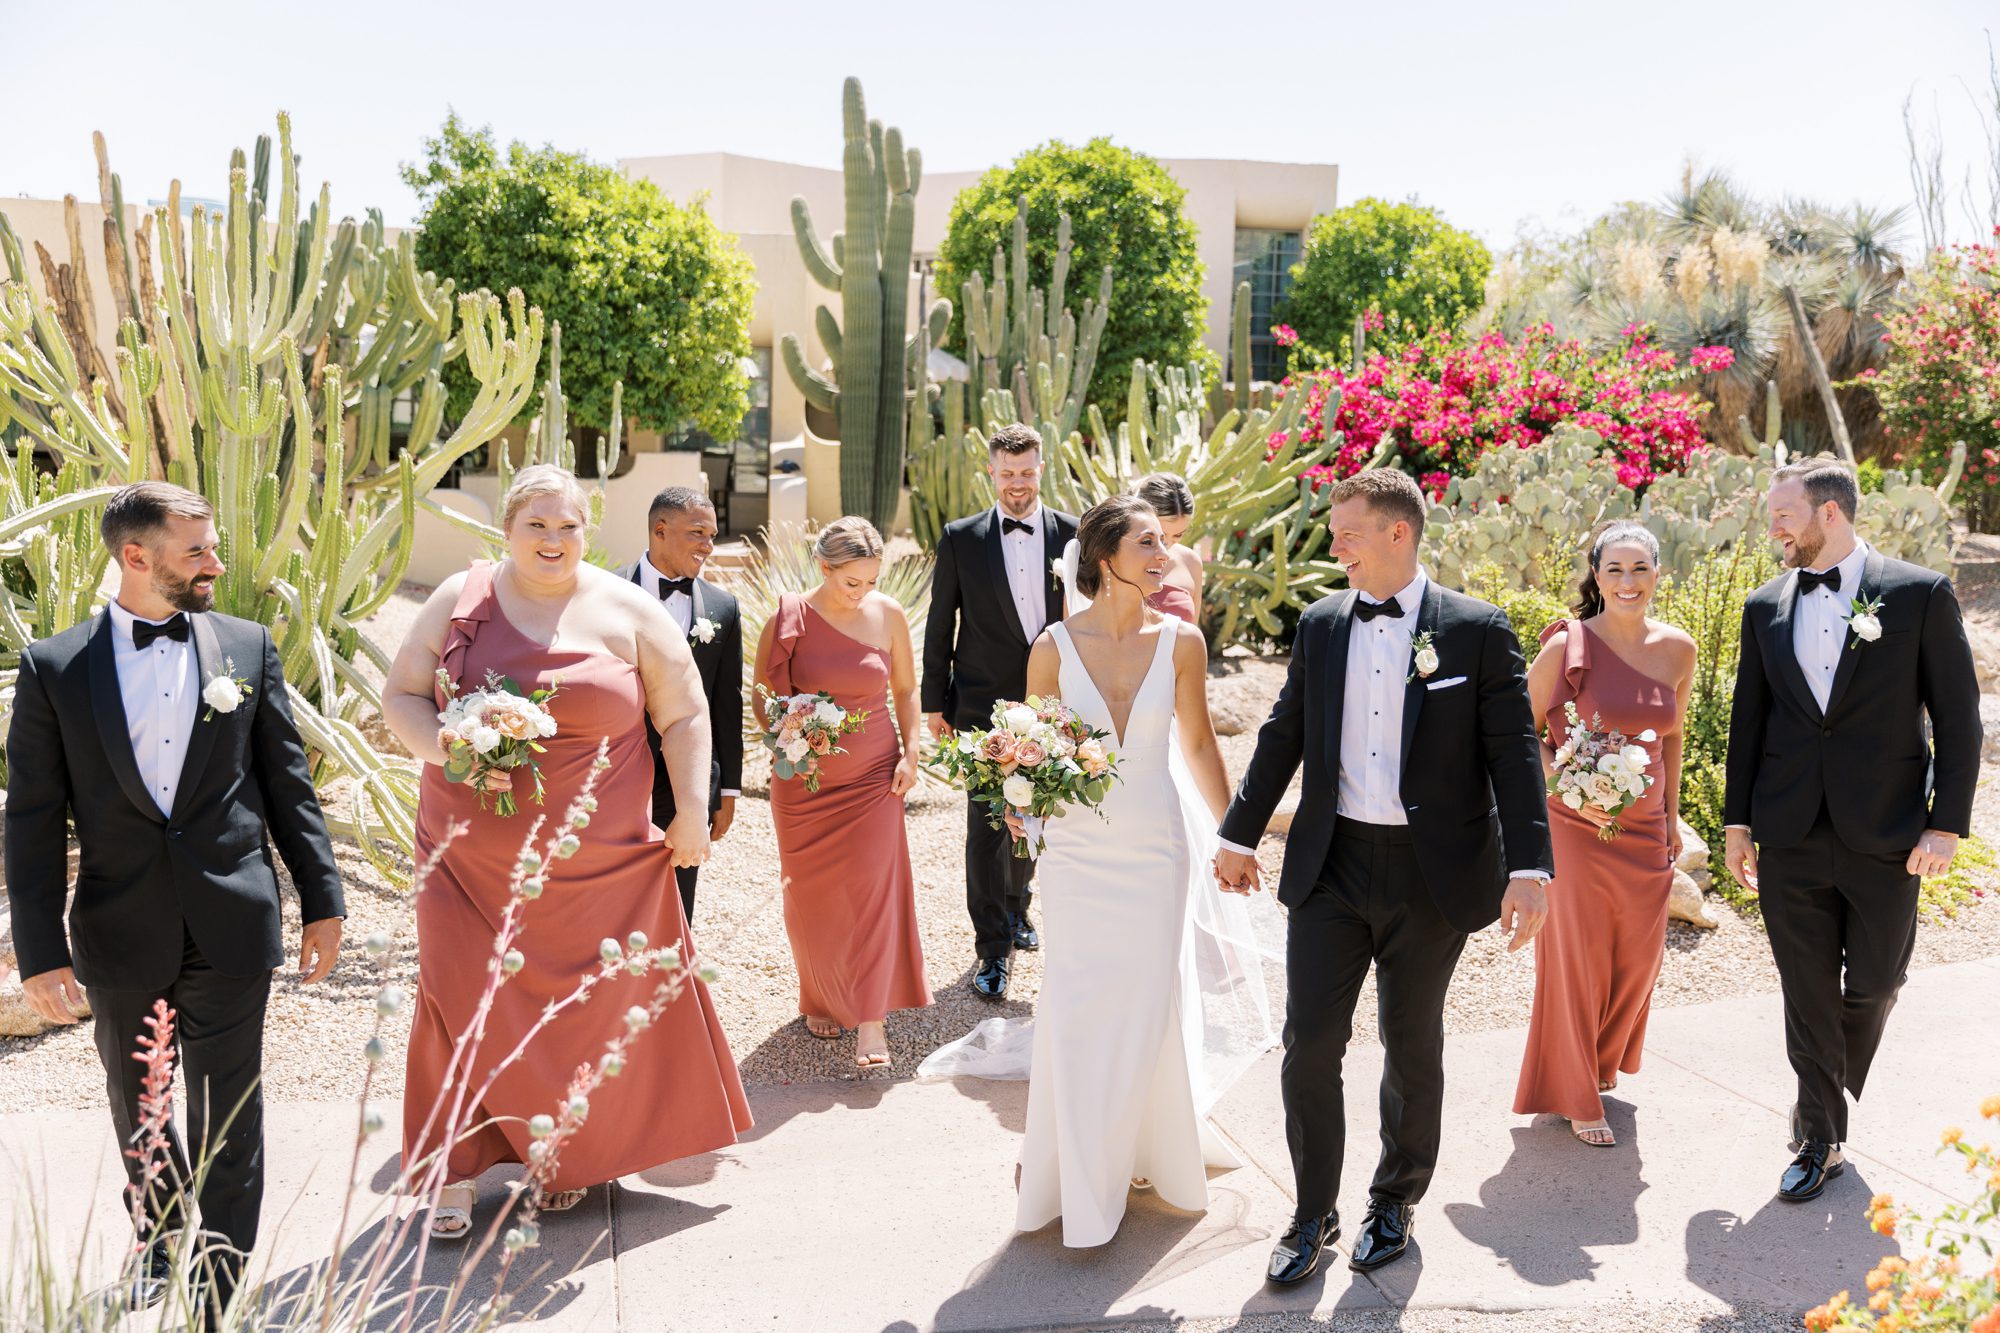 The bridal party posed for photos at the Camelback Inn in Scottsdale wedding